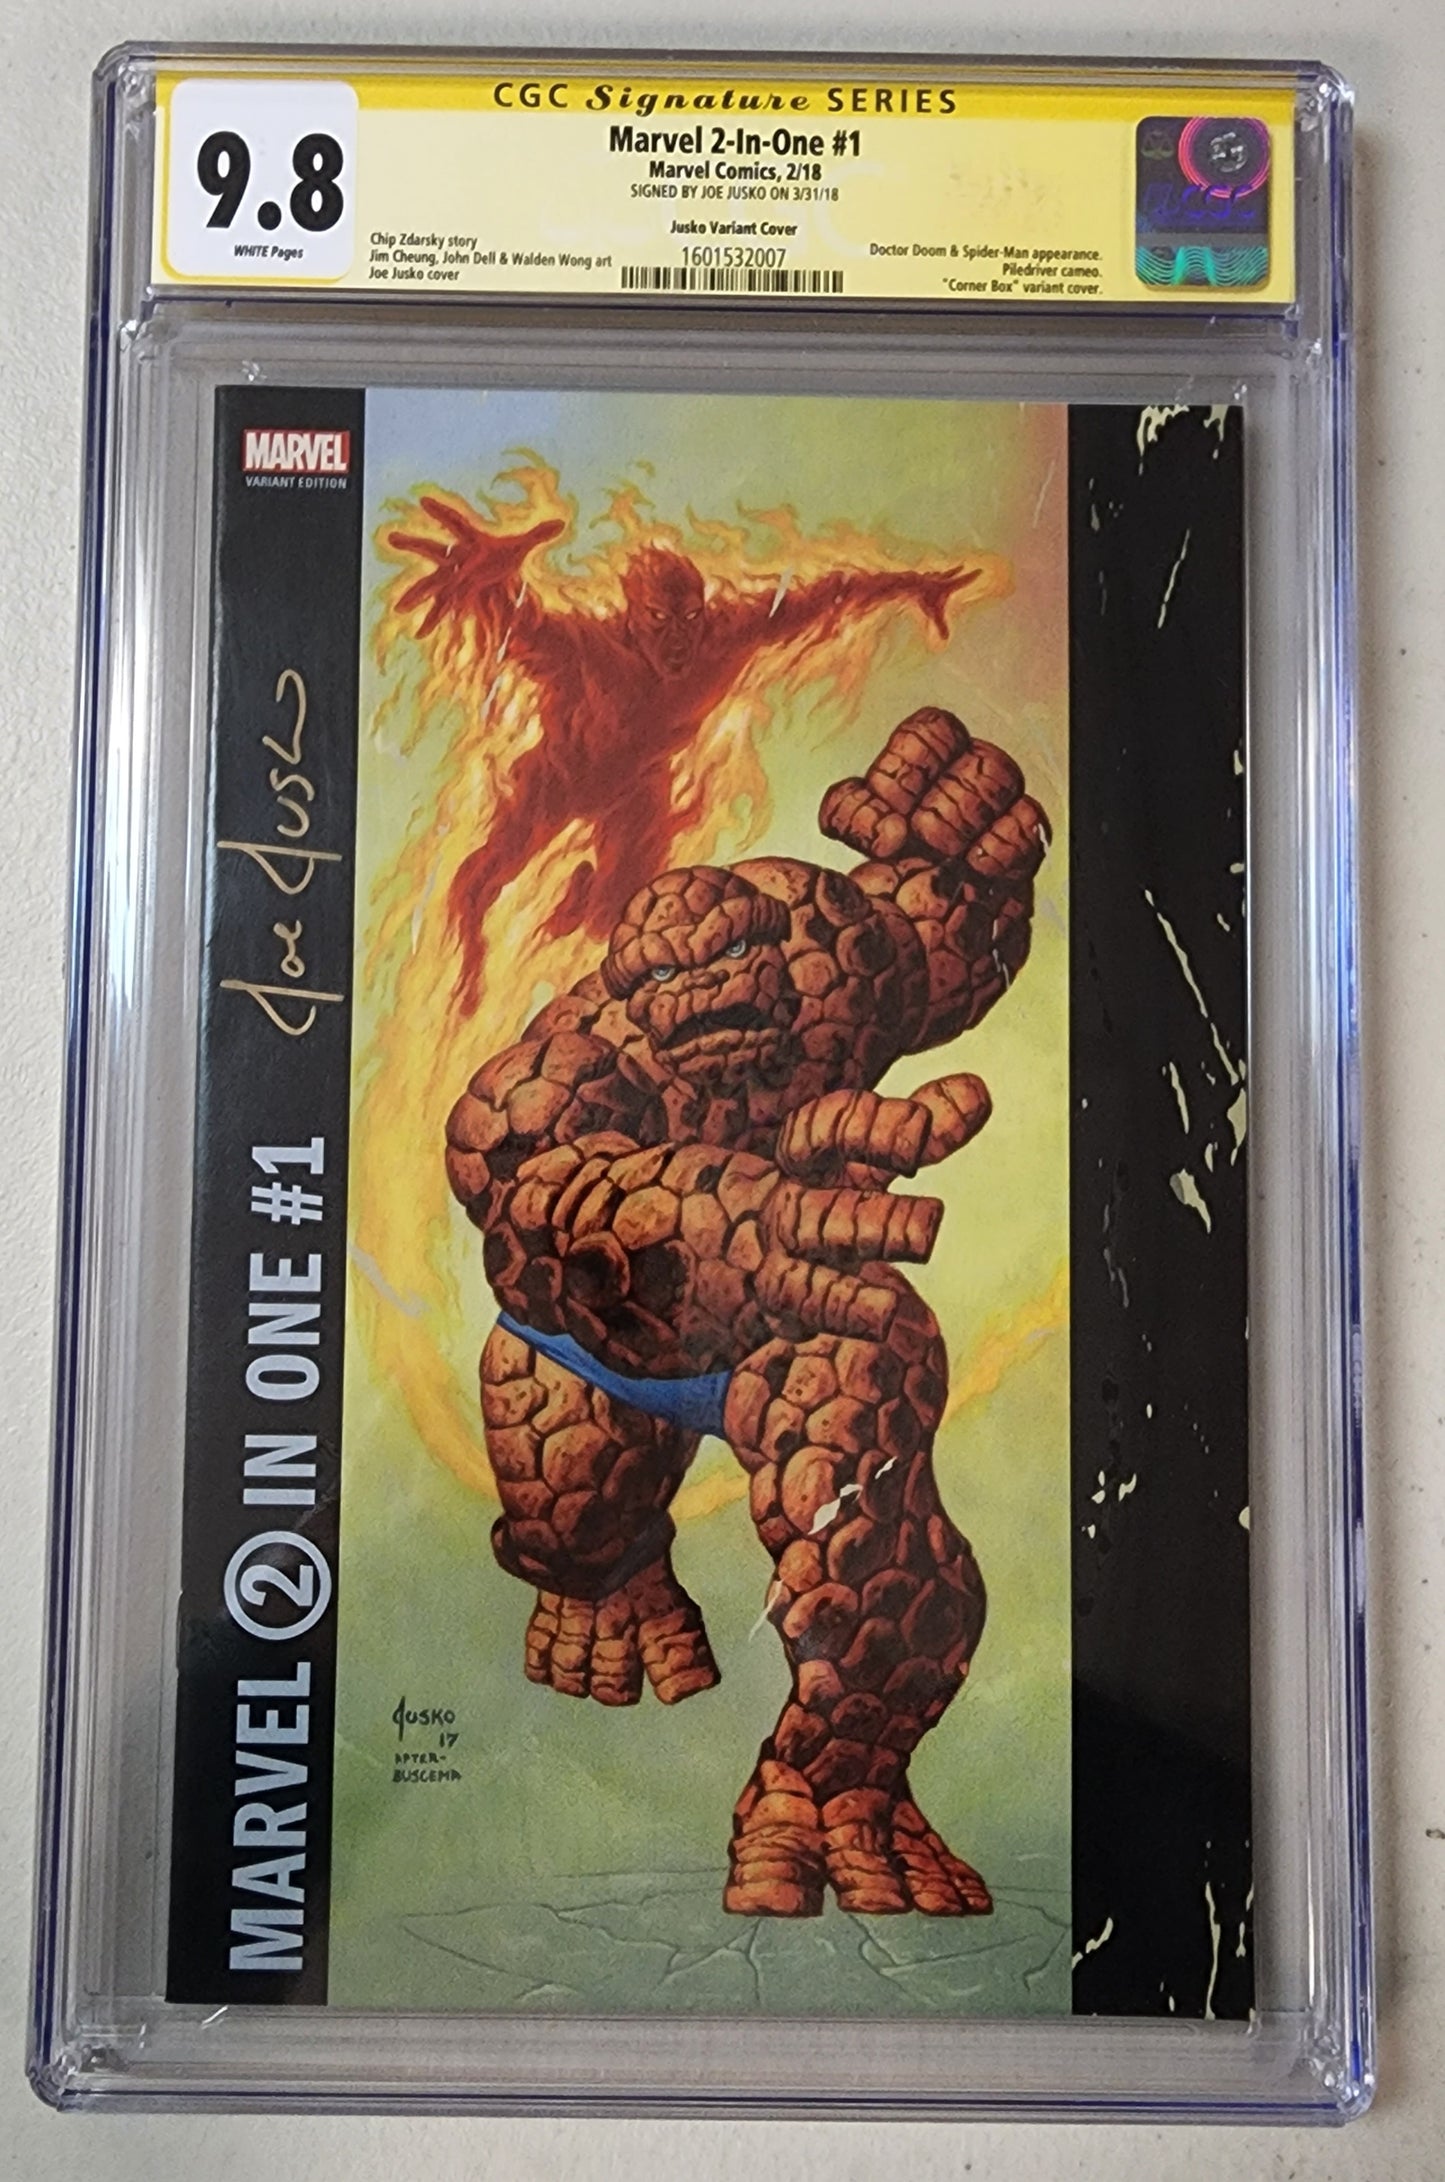 9.8 CGC MARVEL 2-IN-ONE #1 VARIANT SIGNED BY JOE JUSKO [1601532007]